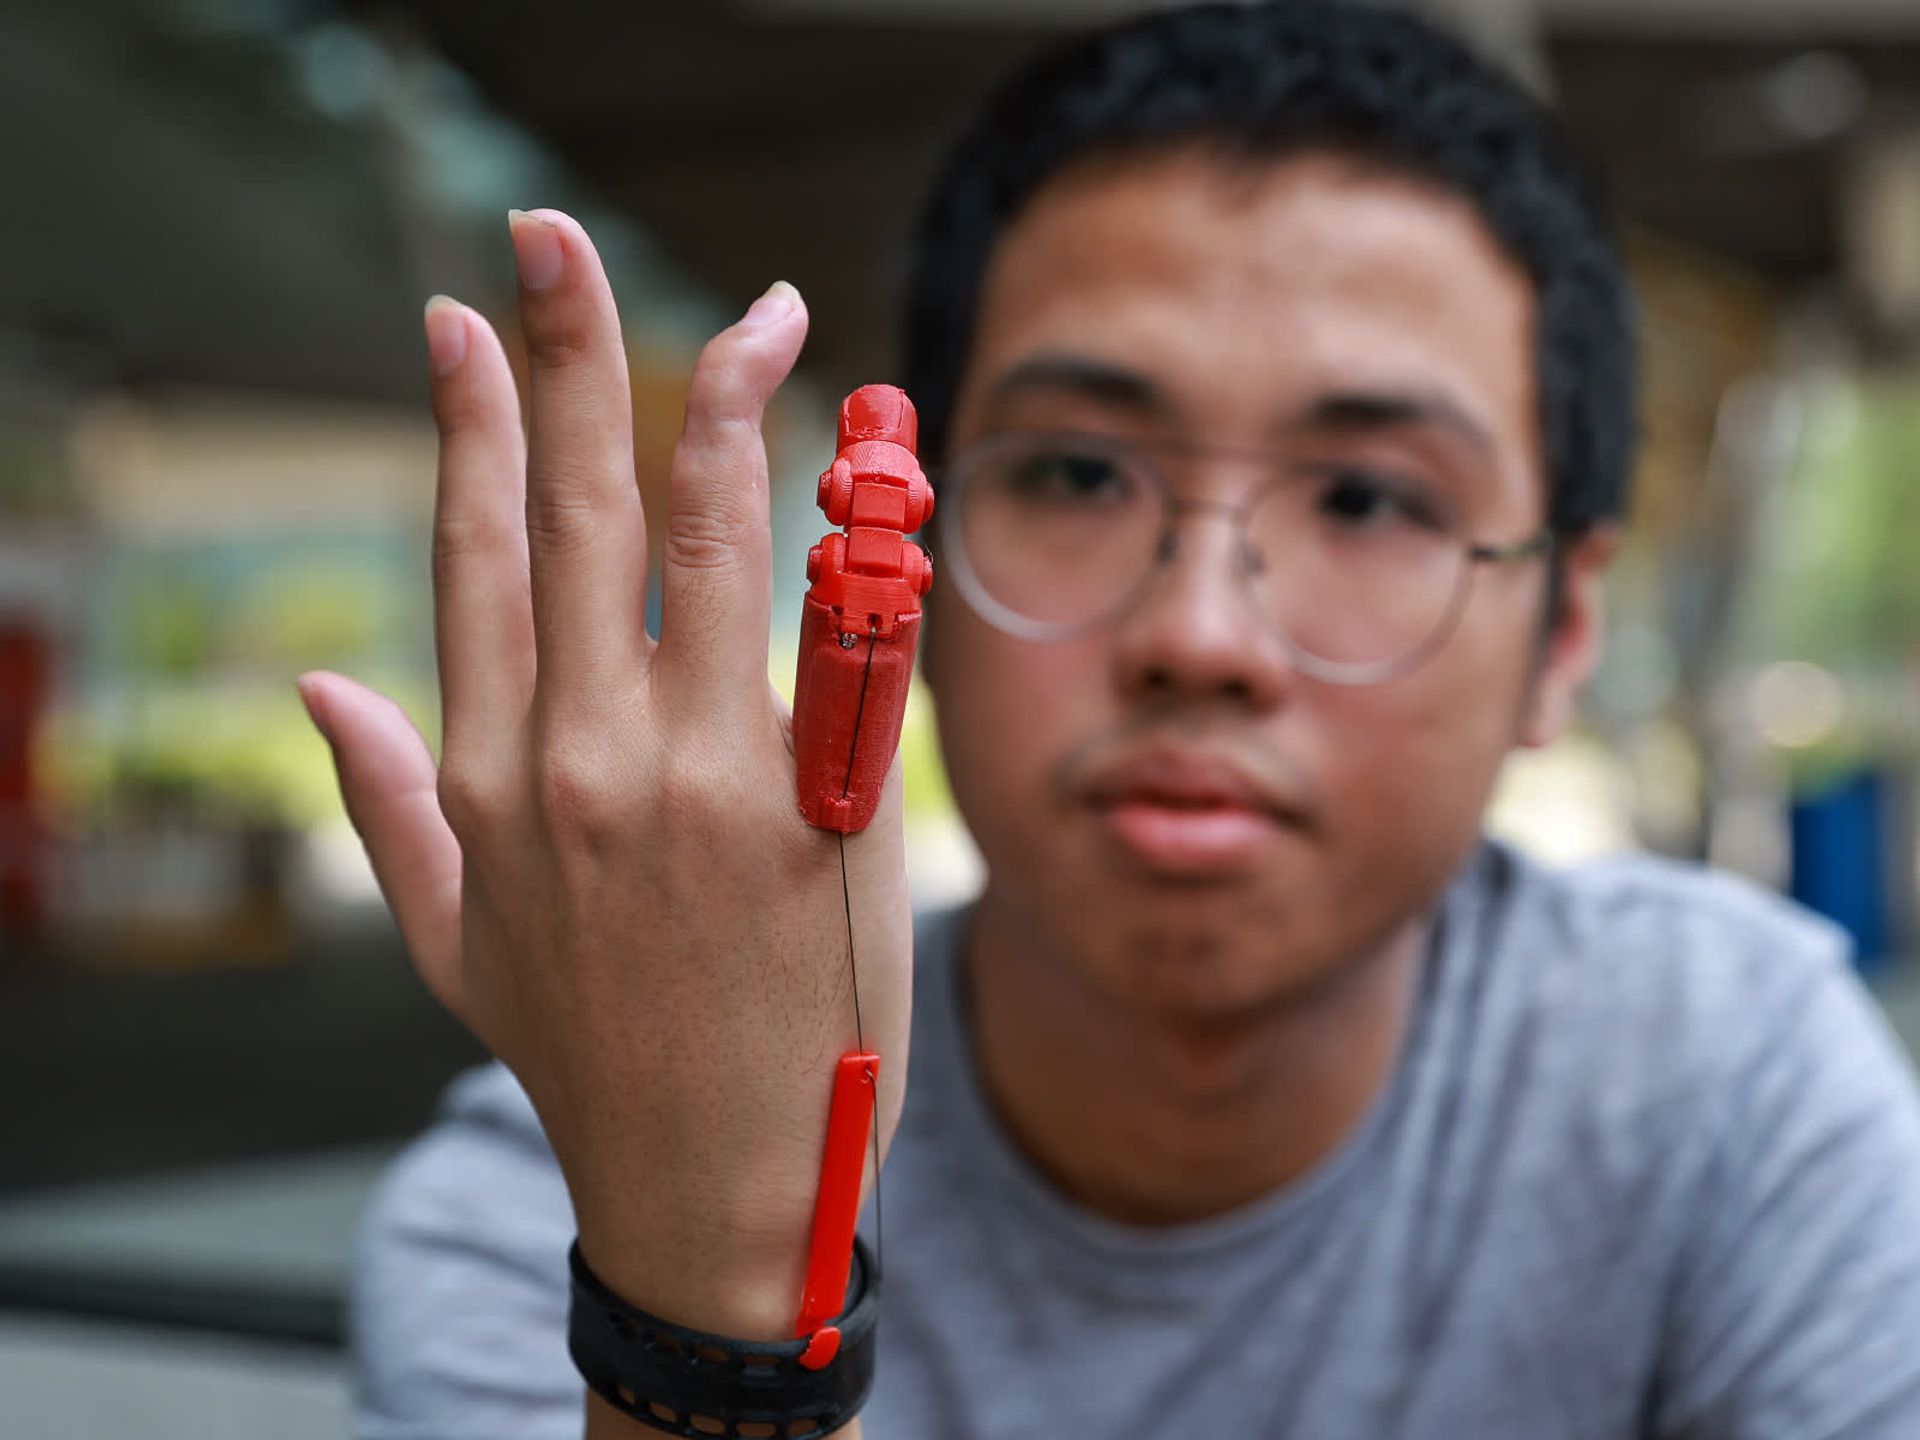 Mr Russel Ko, 21, who had his right little finger amputated after an accident, received a 3D-printed functional finger prosthesis from Tan Tock Seng Hospital that allows him to perform tasks such as opening a bottle.